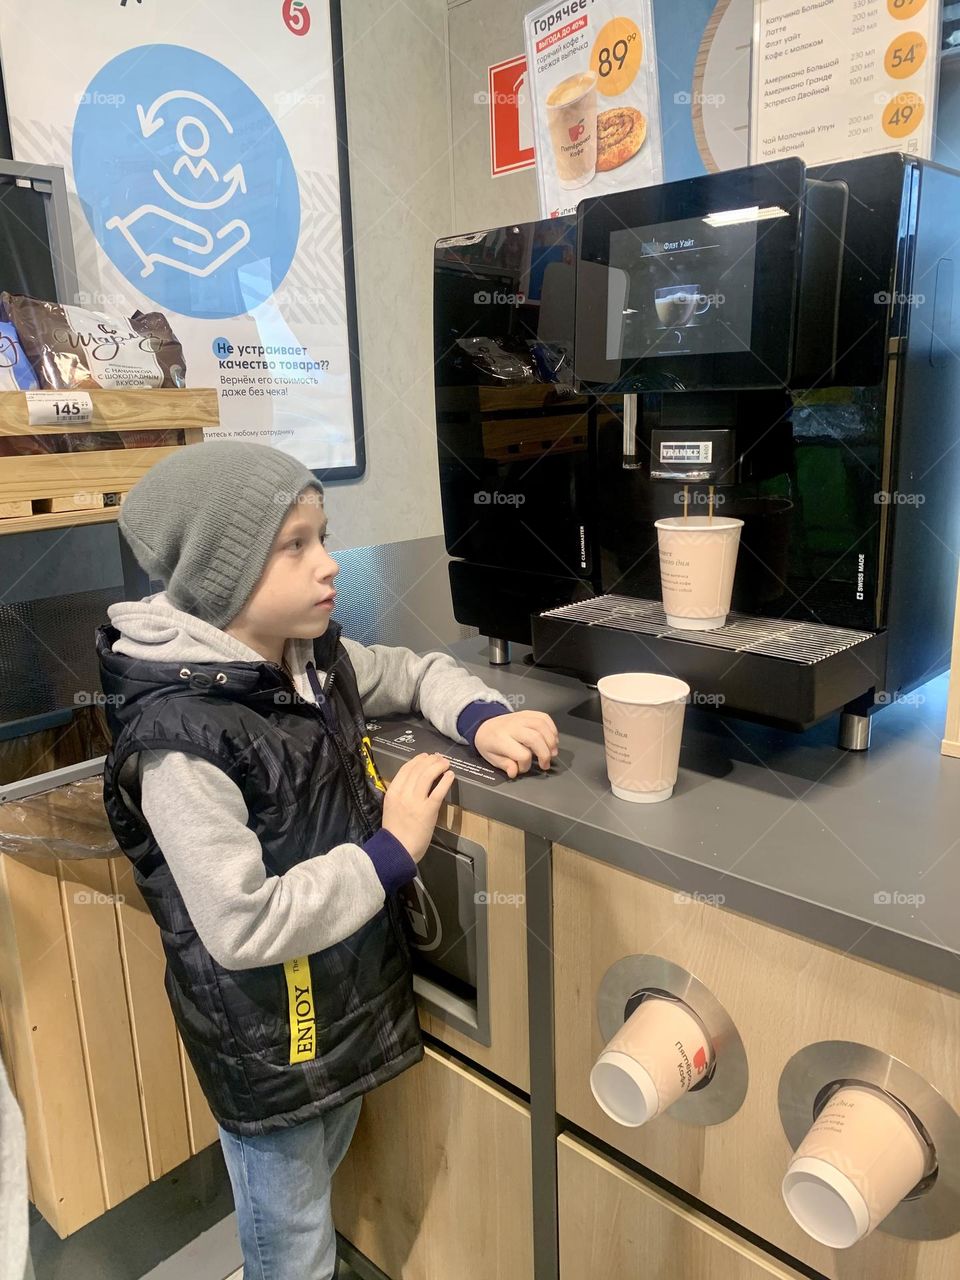 The boy is waiting for coffee from the avitomat in the store